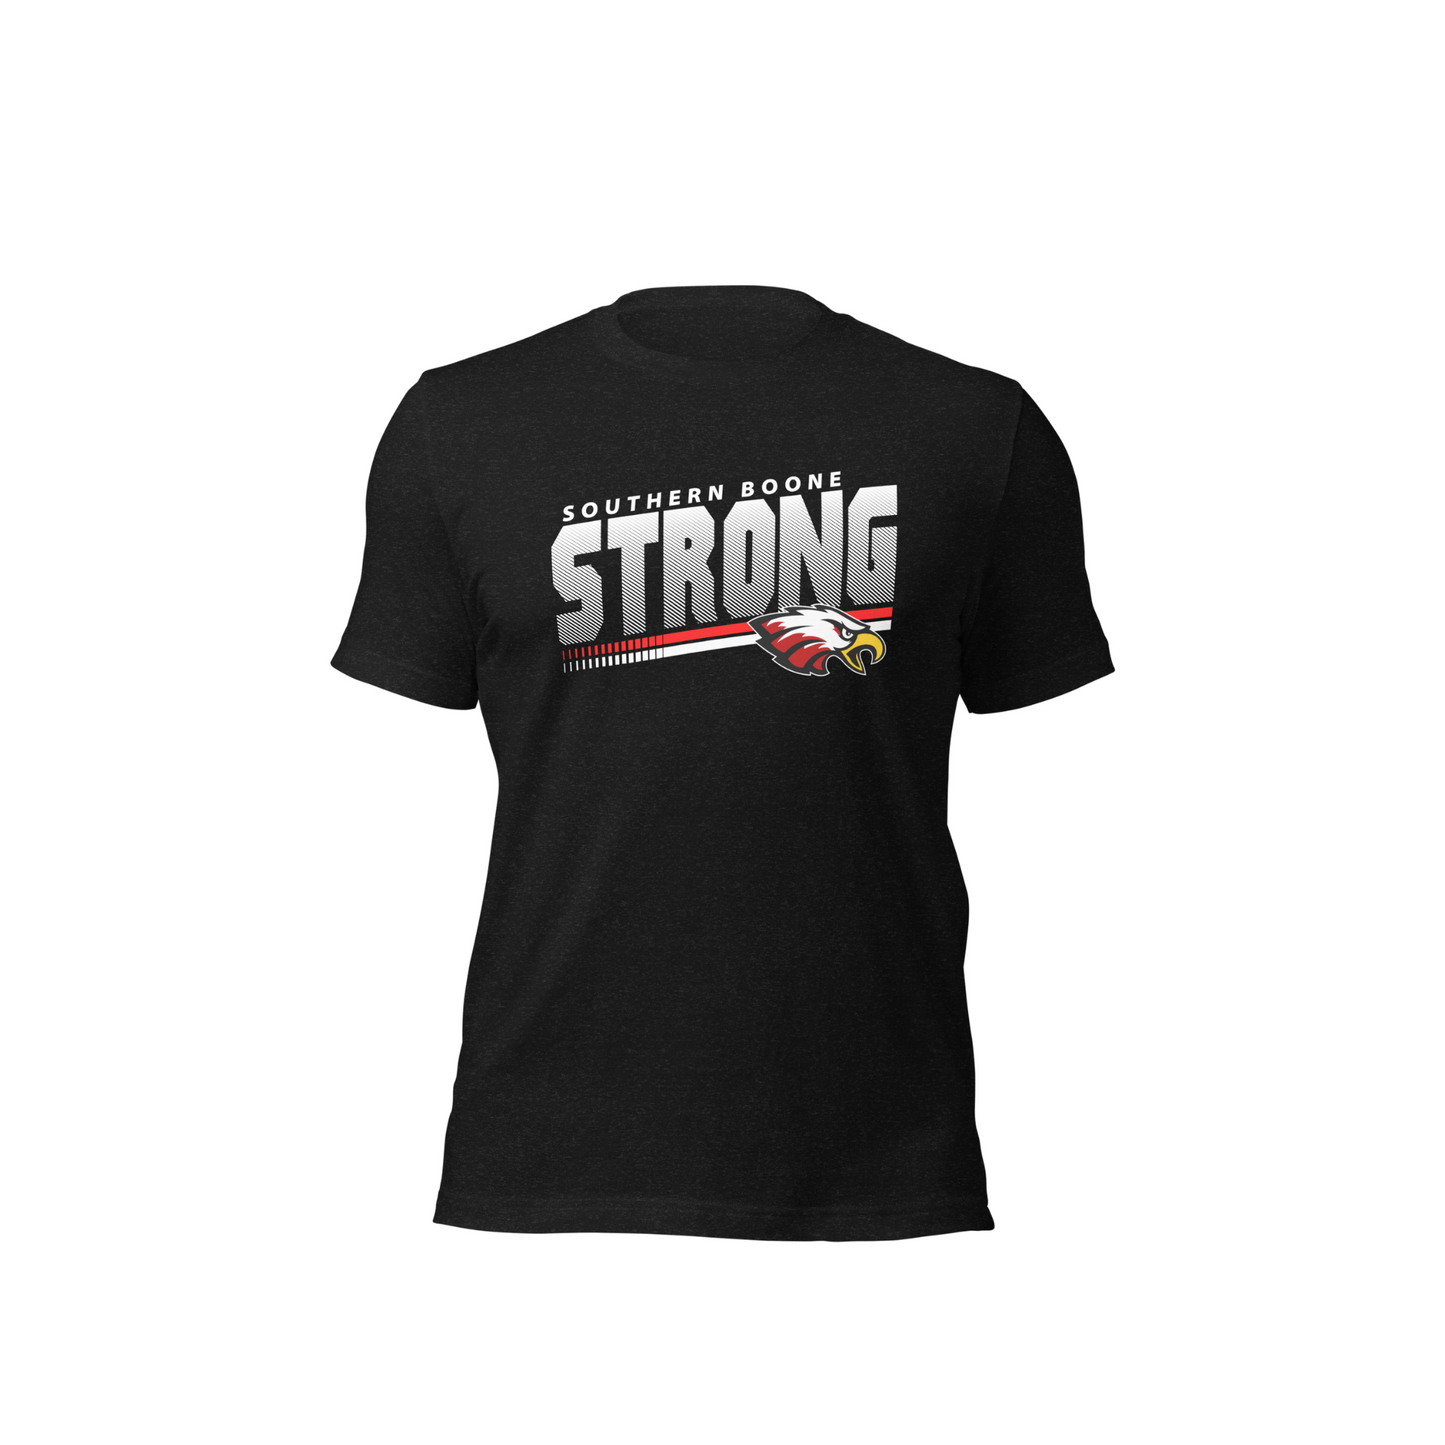 SOBOCO Strong Unisex Adult T-shirt